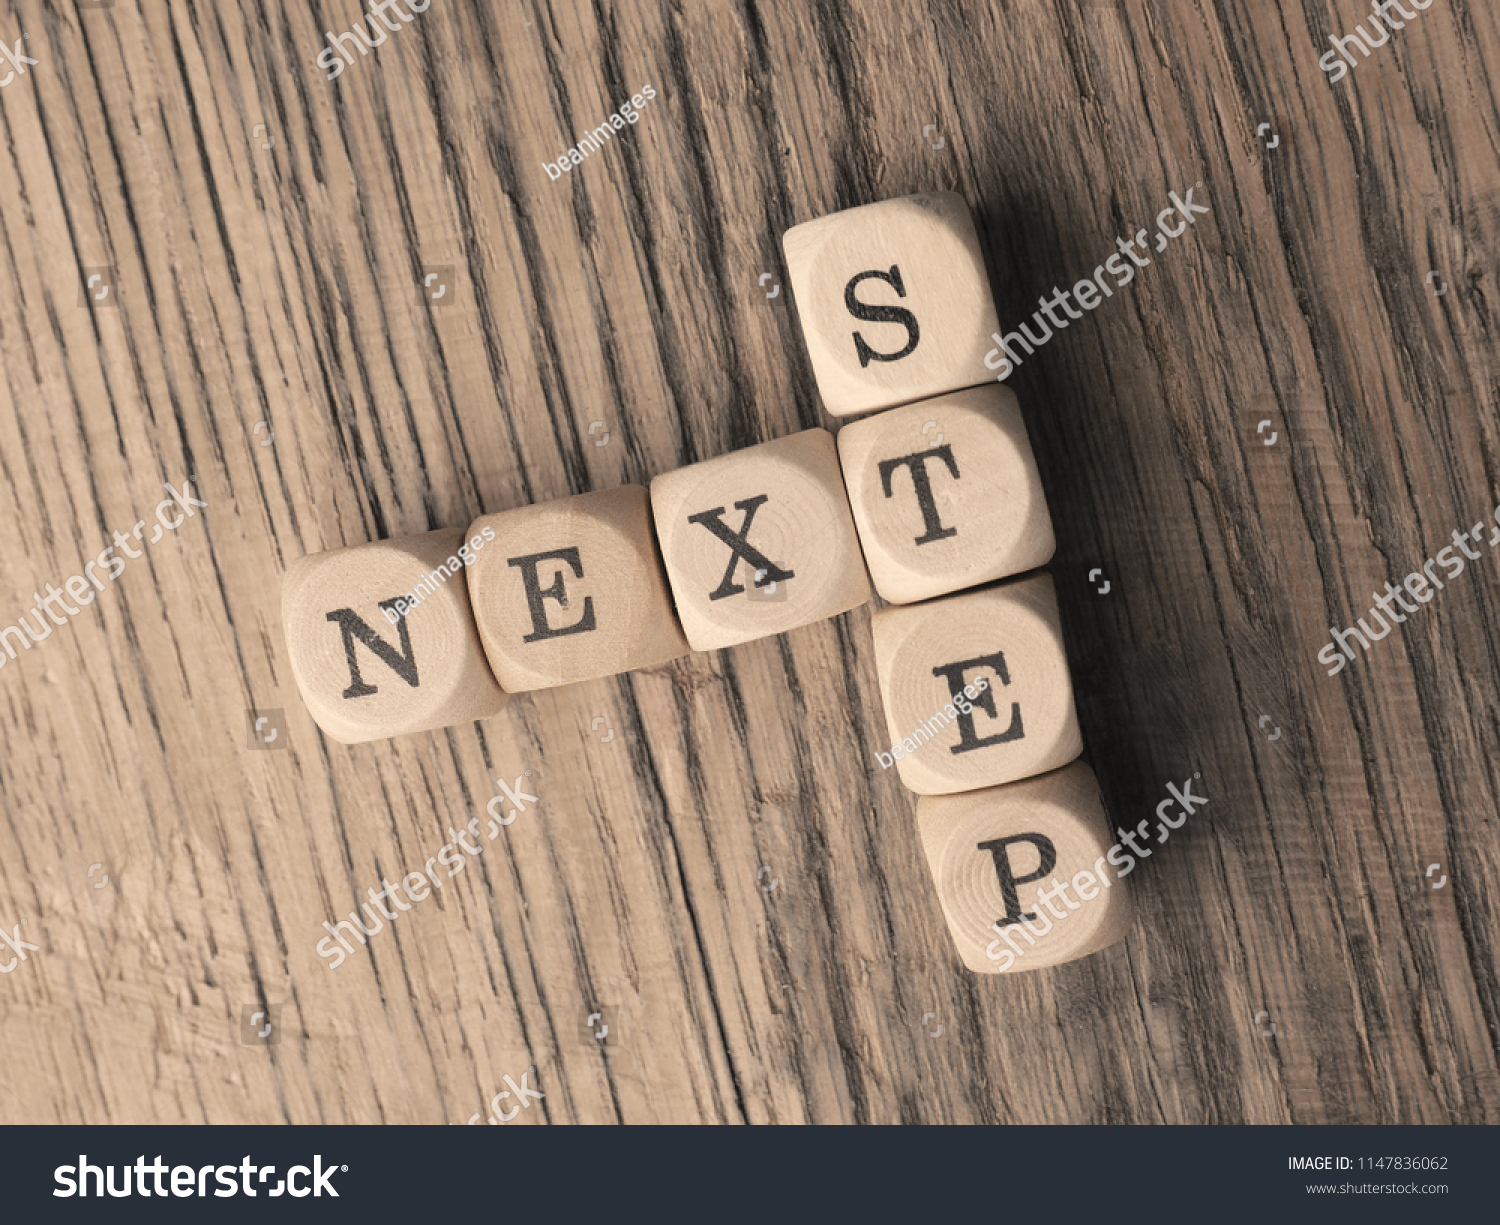 The words Next Step on small wooden dices on a table, close up shot, view from above #1147836062